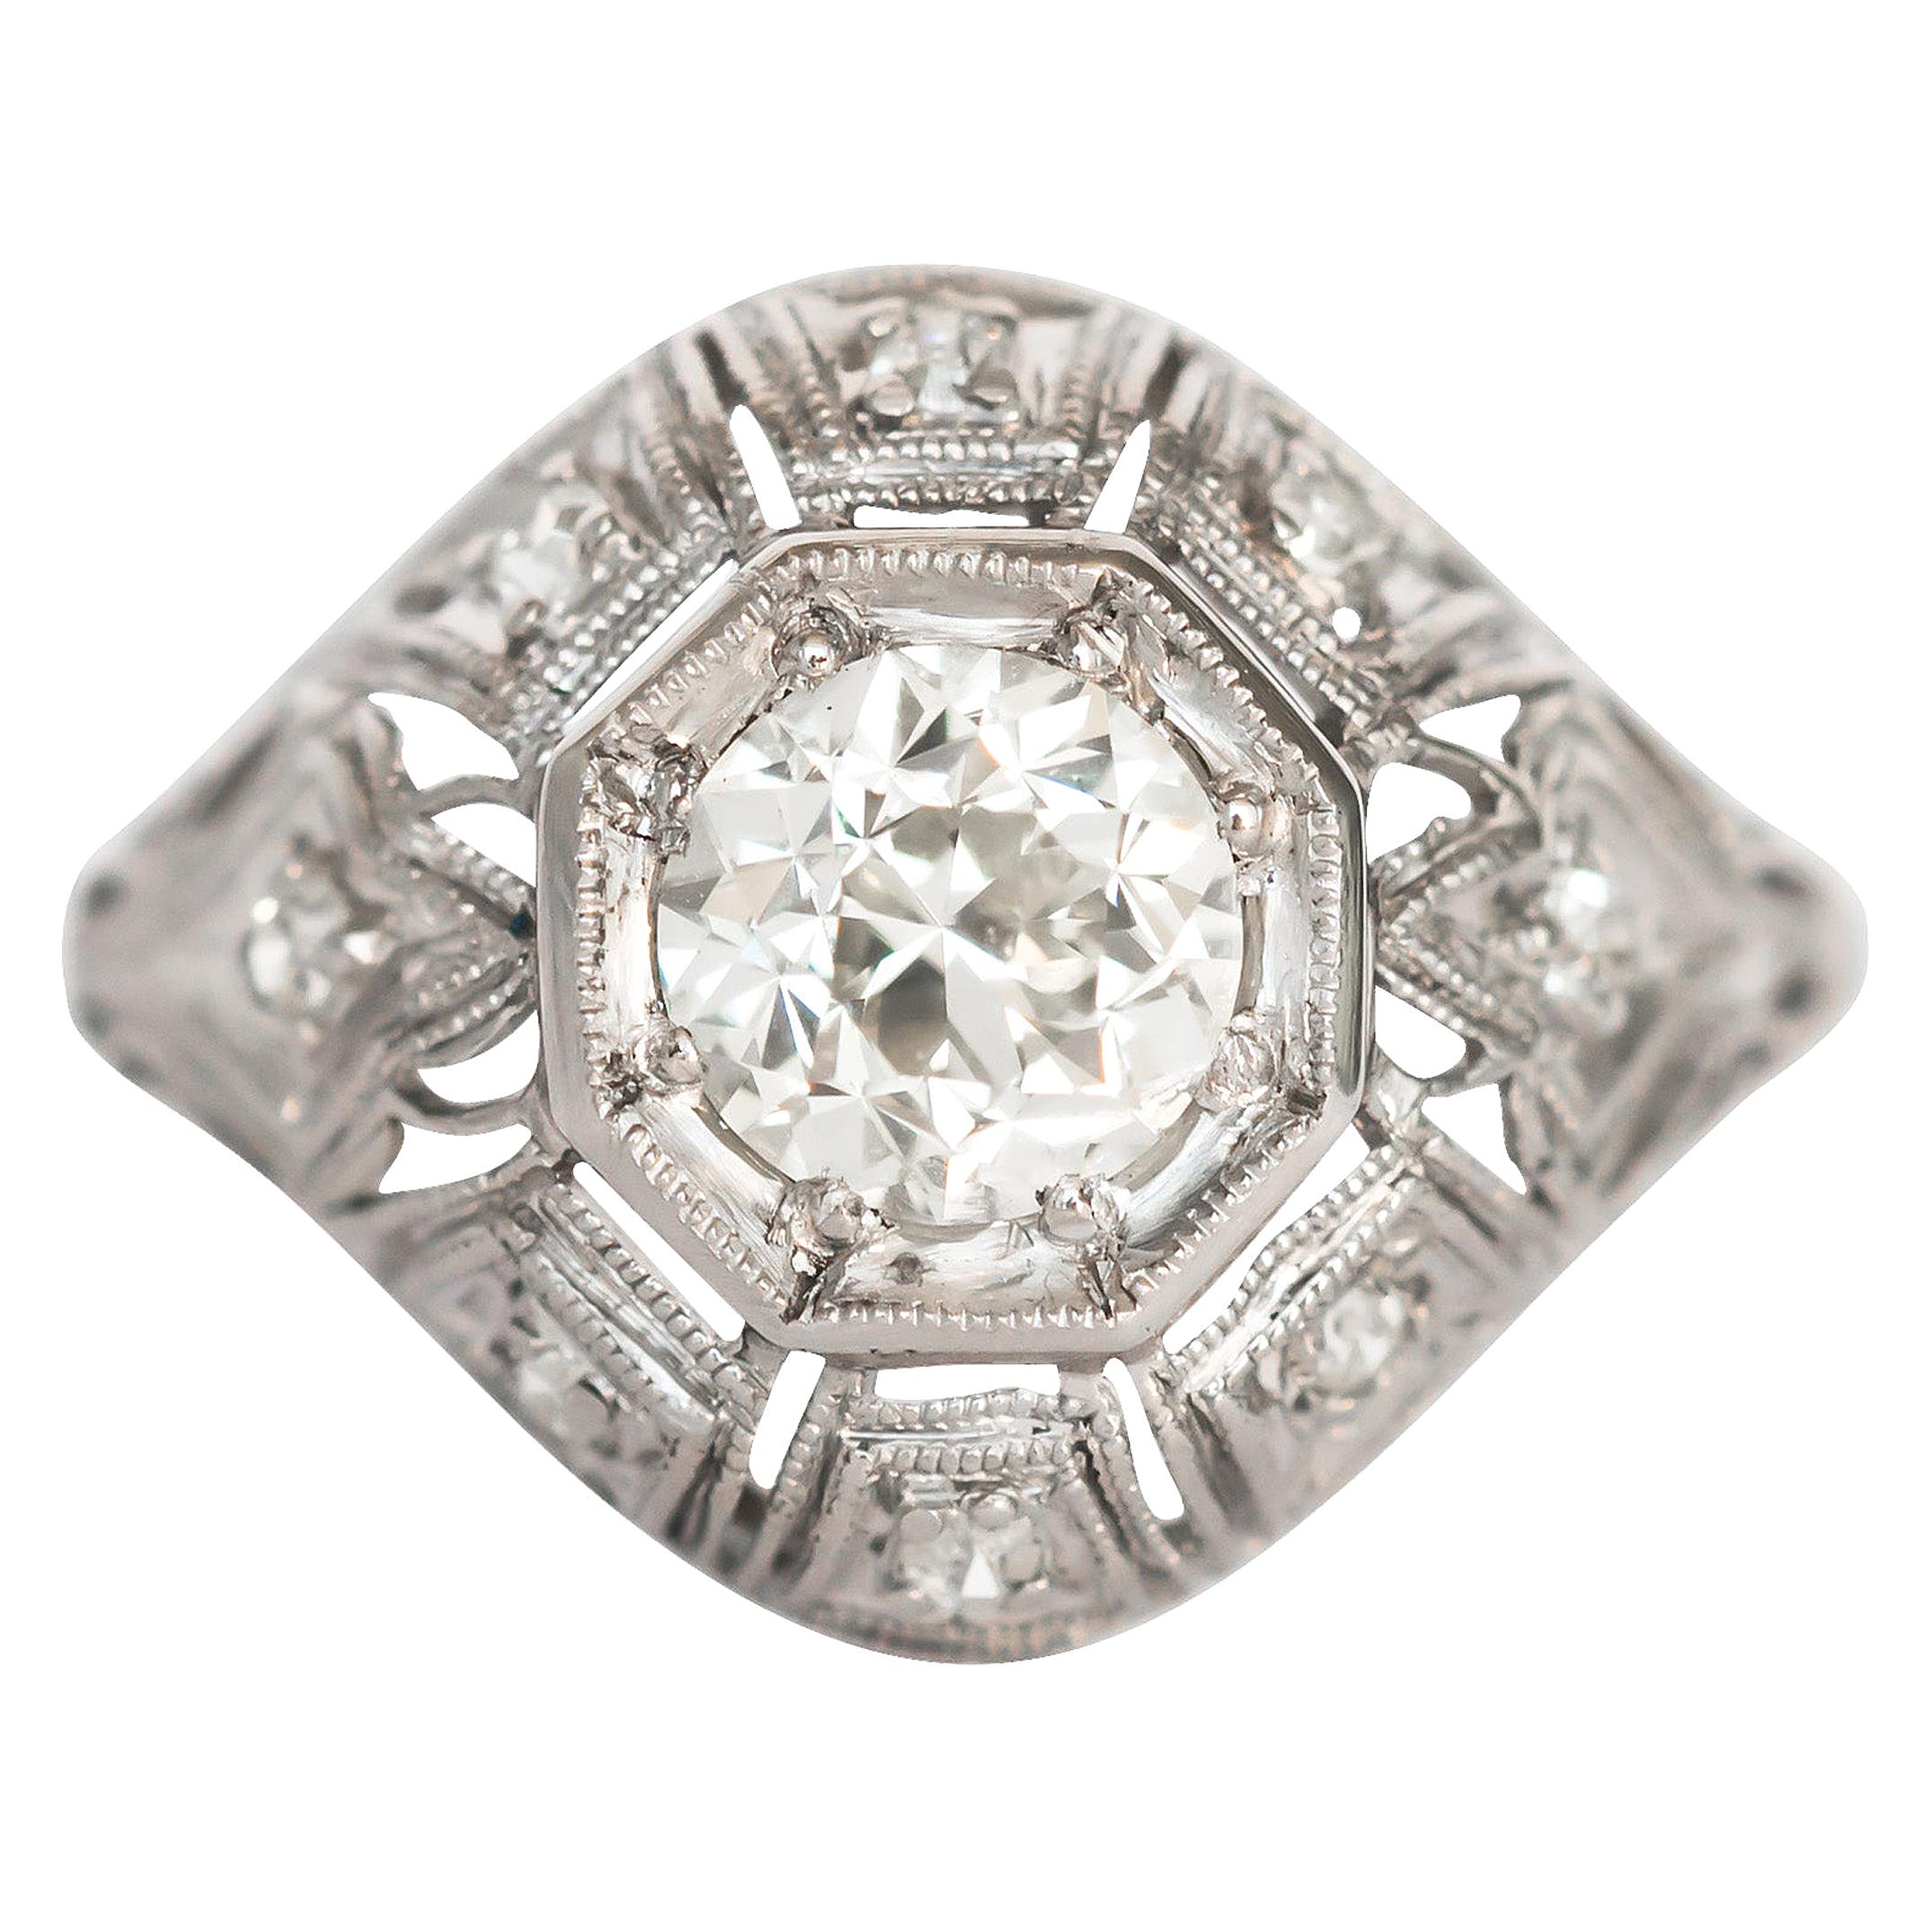 GIA Certified 1.01 Carat Diamond Engagement Ring For Sale